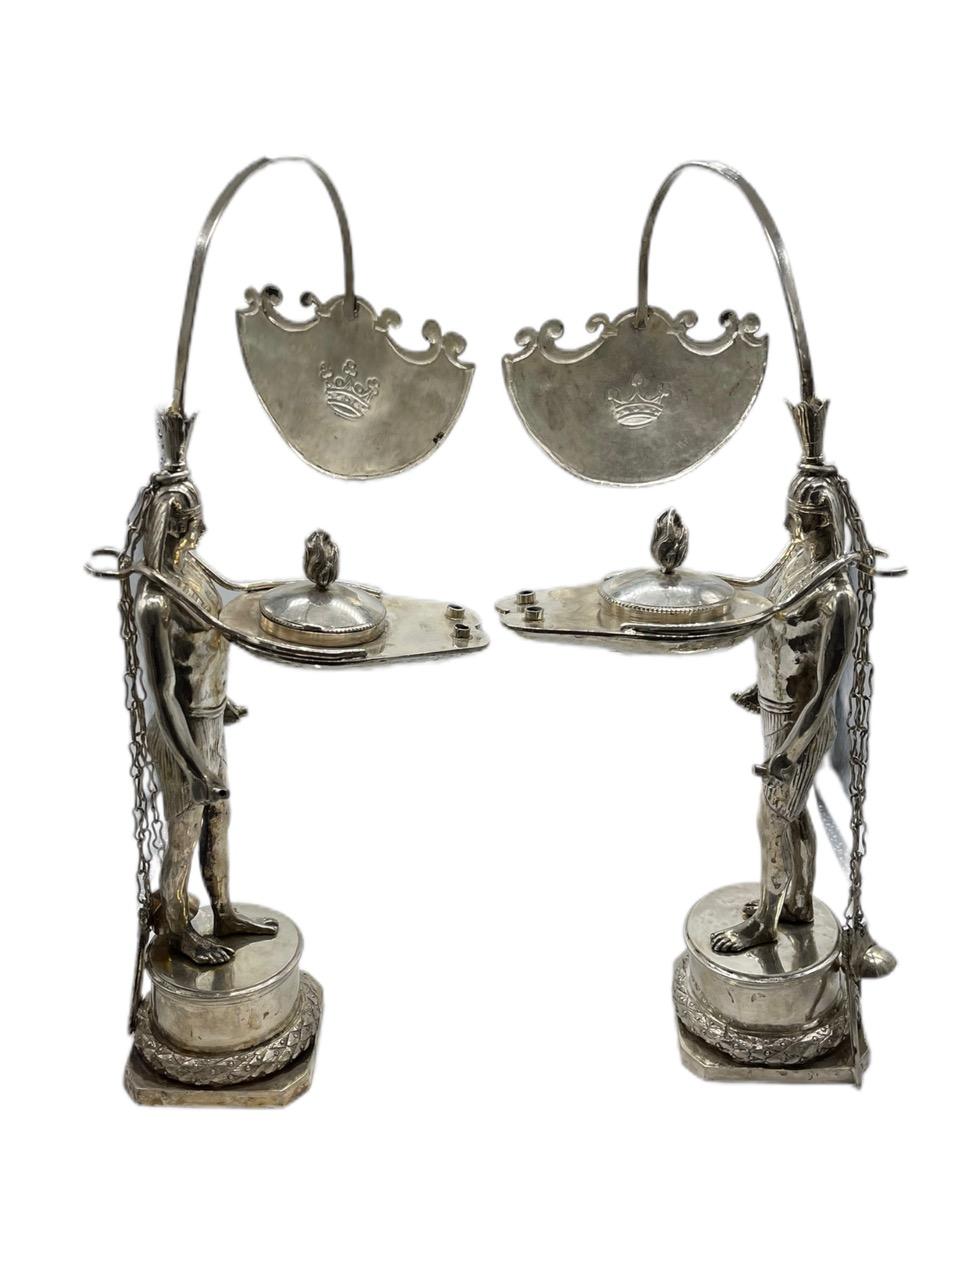 Pair of Early 19th Century Italian Antique Silver Oil Lamps by Vincenzo Belli II For Sale 9